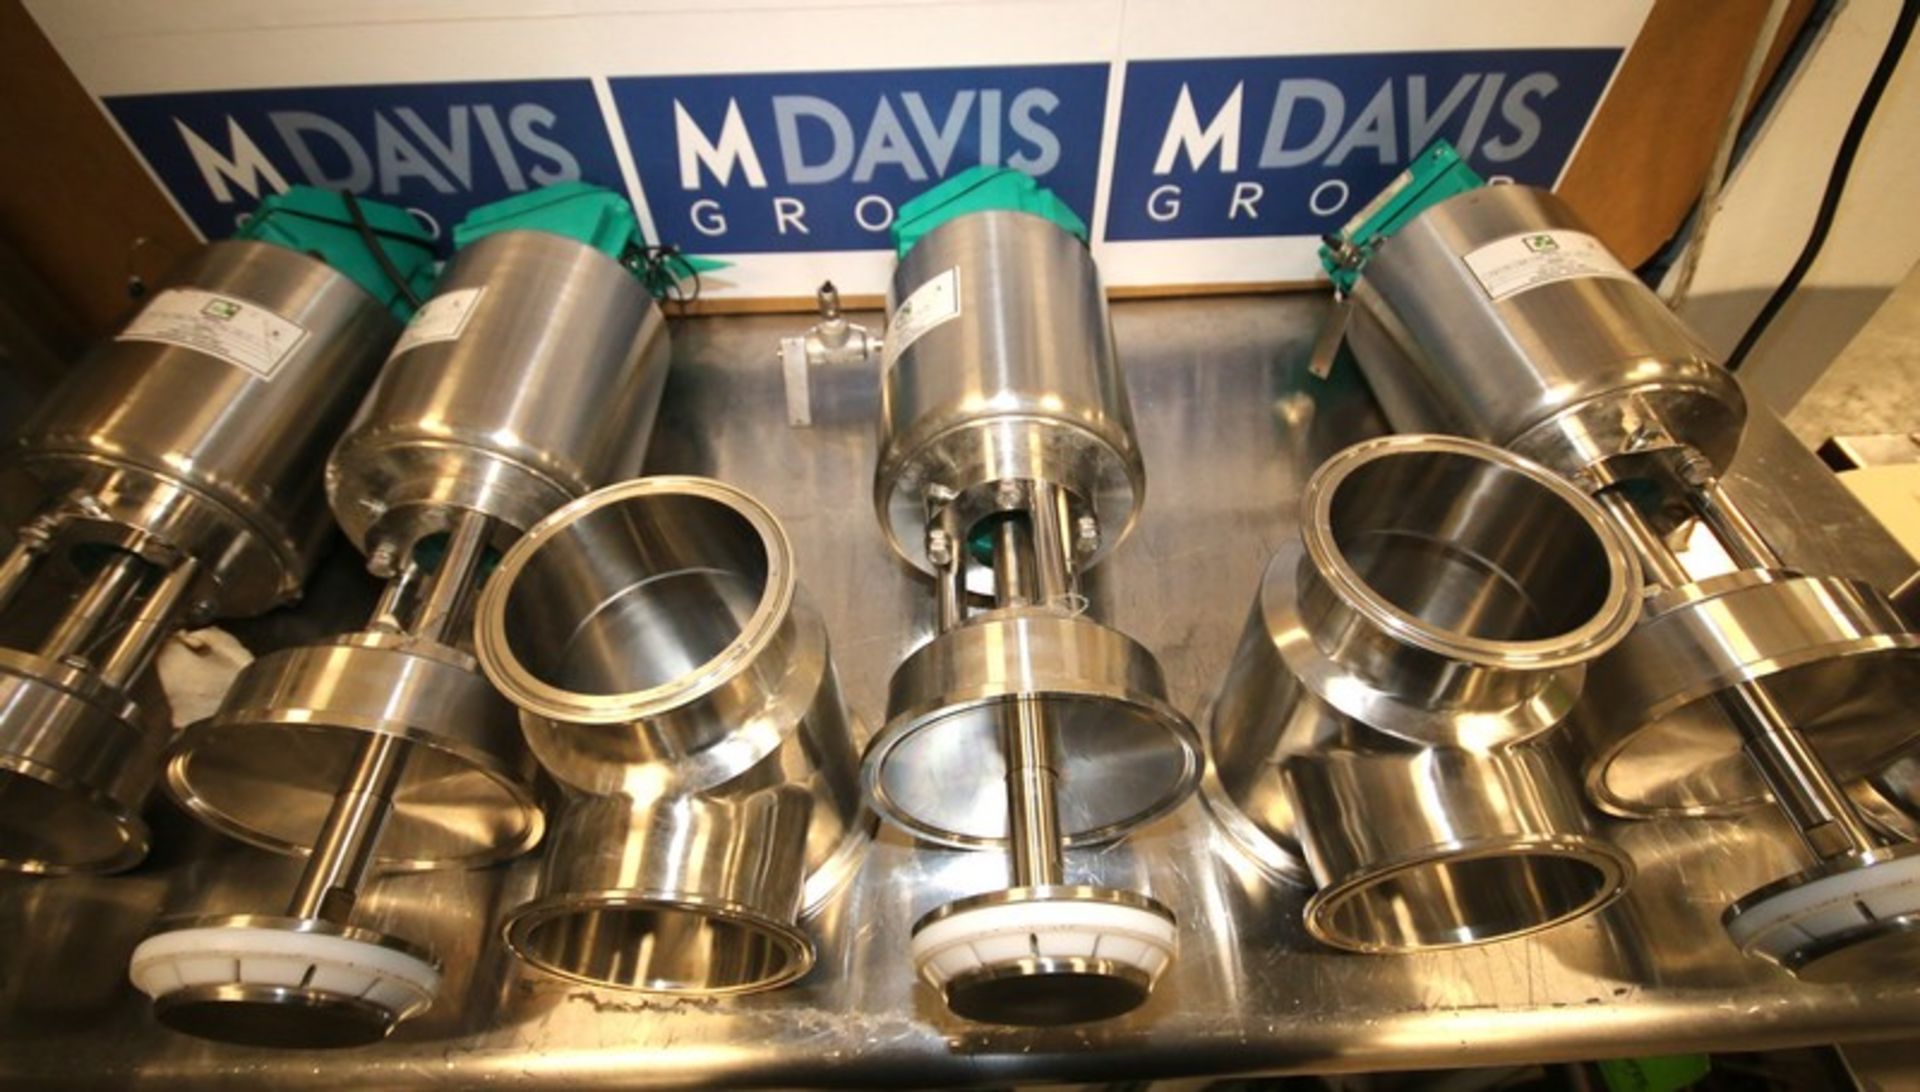 Lot of (4) Tri Clover 4" 2-Way S/S Air Valves, Model 761TR-10M-19S-4-316L-32-5, SN 35182-05, - Image 3 of 8